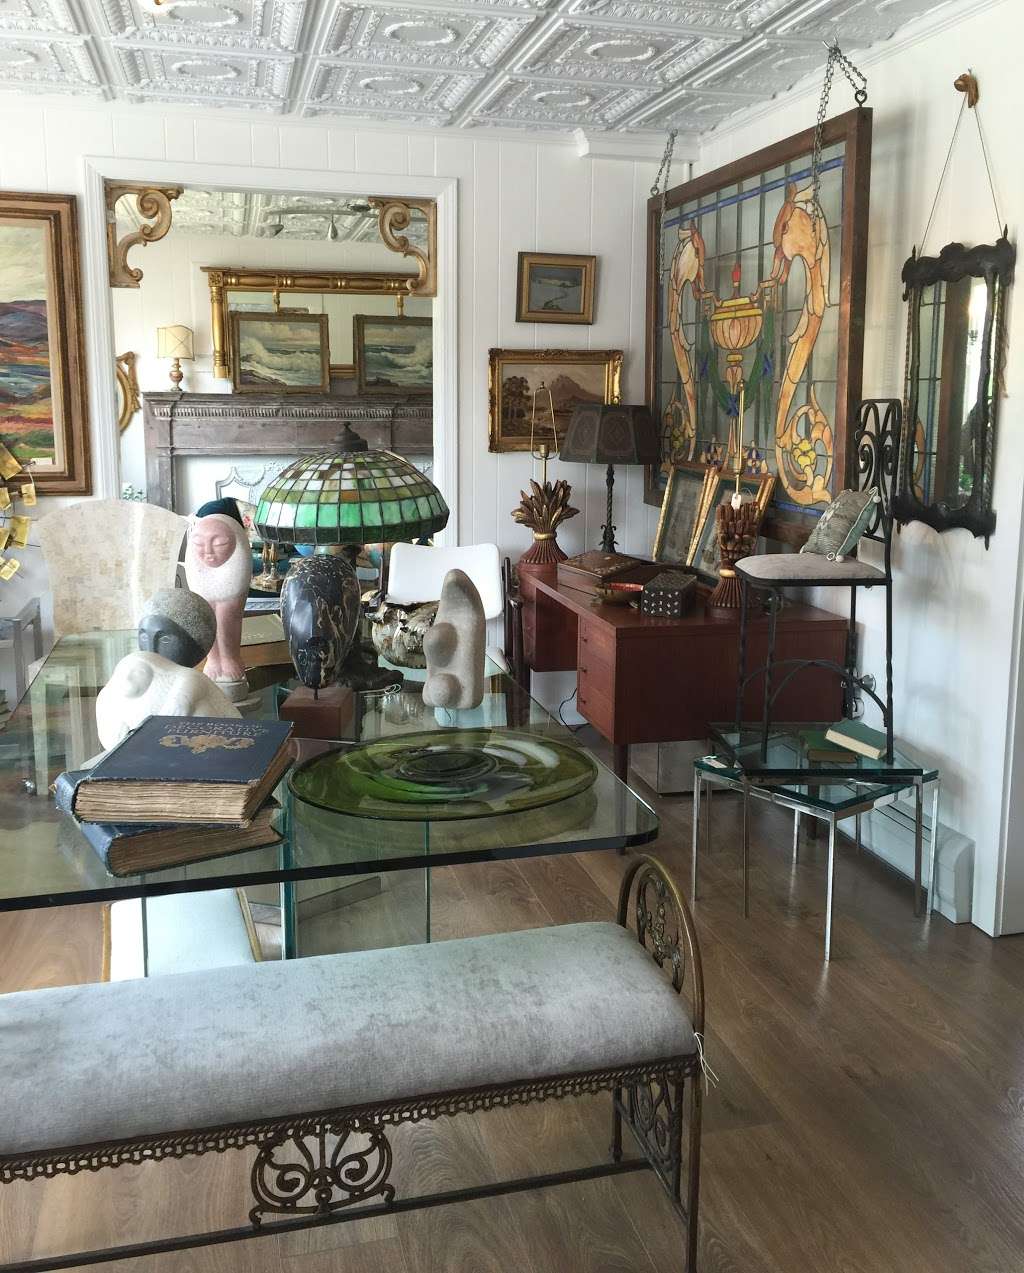 Discovery Antiques & Jewelry | 49 US-202, Far Hills, NJ 07931, USA | Phone: (908) 620-1776